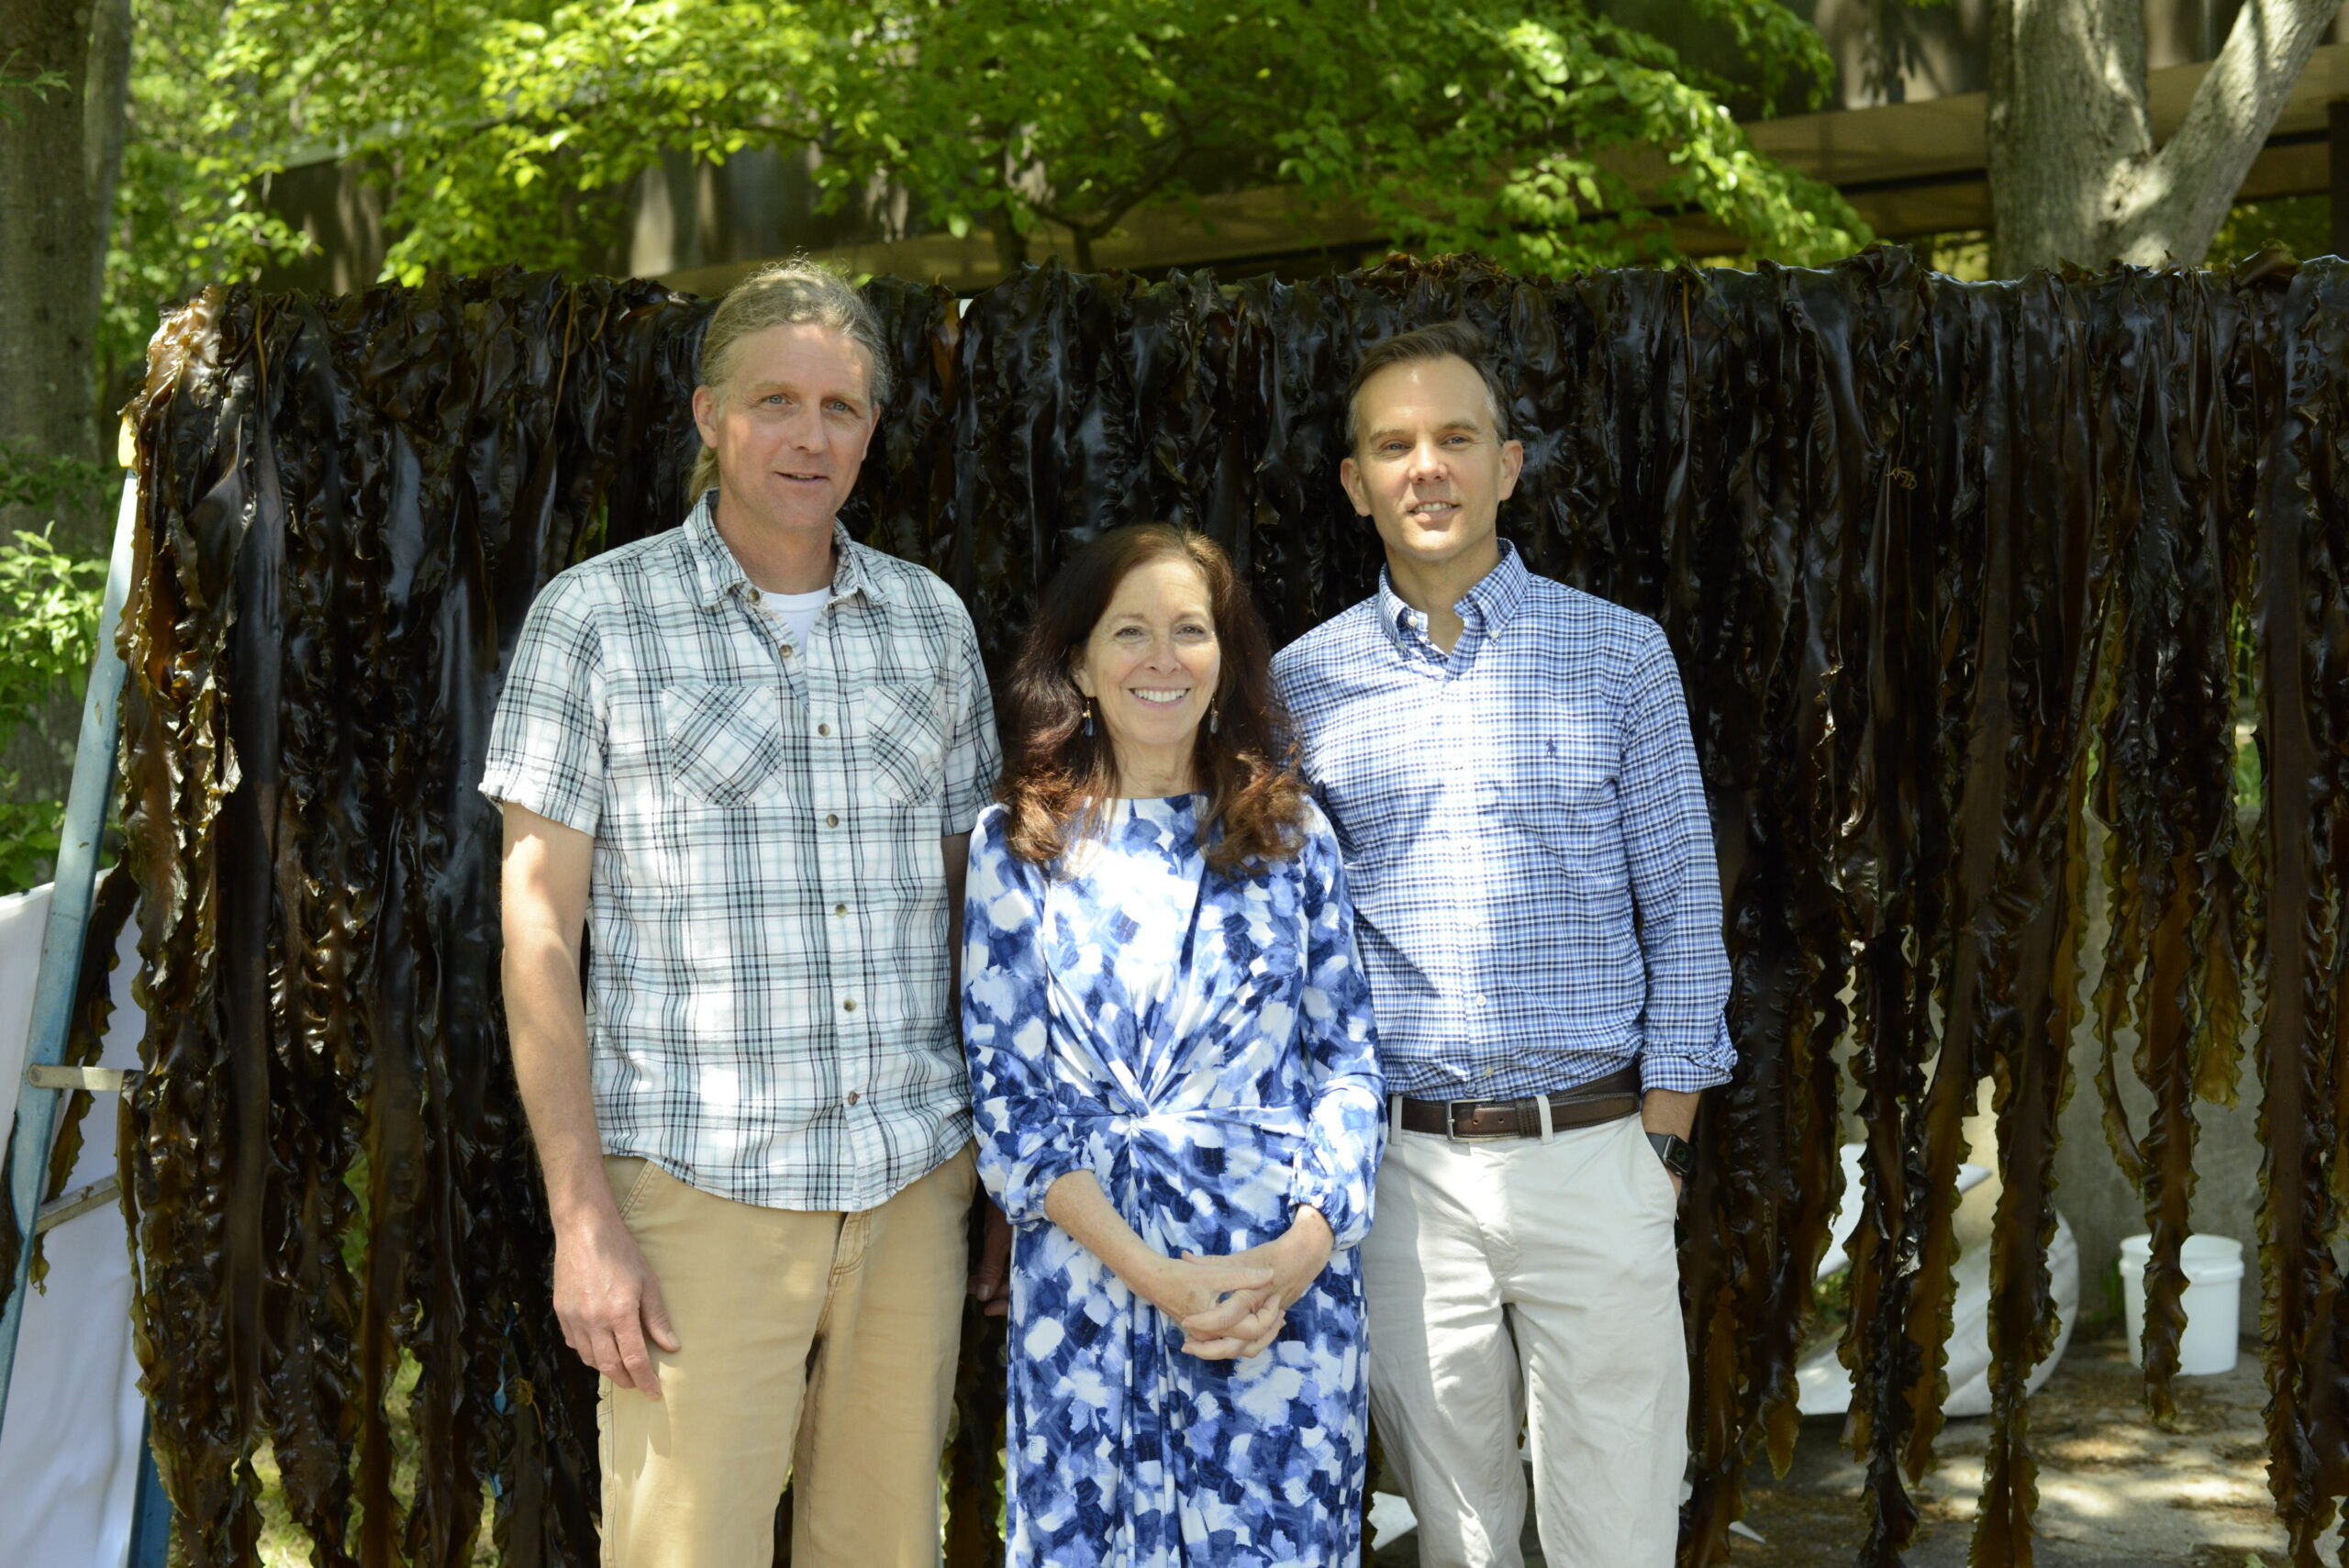 Mike Doall, Adrienne Esposito and Christopher Gobler (left to right) at a press conference at Stony Brook University in front of kelp harvested from the East River.